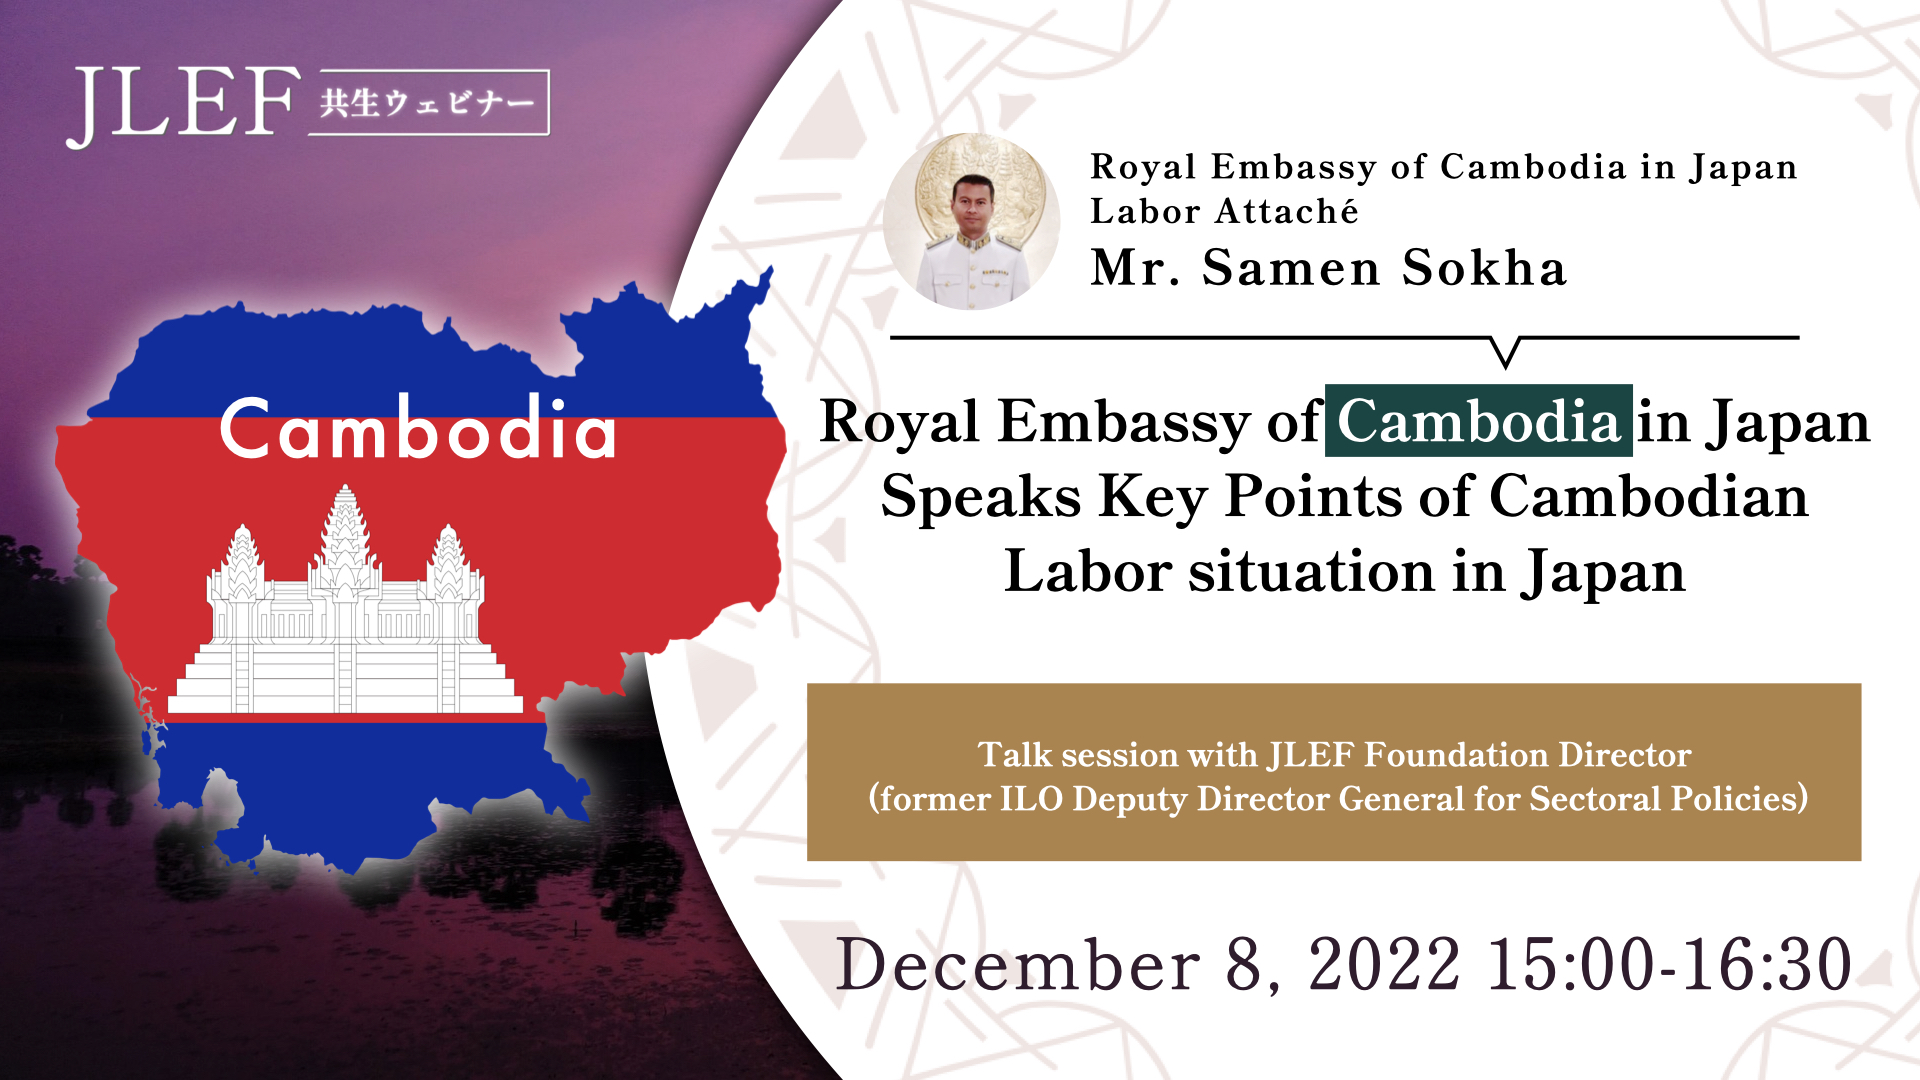 Royal Embassy of Cambodia in Japan talks Speaks Key Points of Cambodian Labor situation in Japan